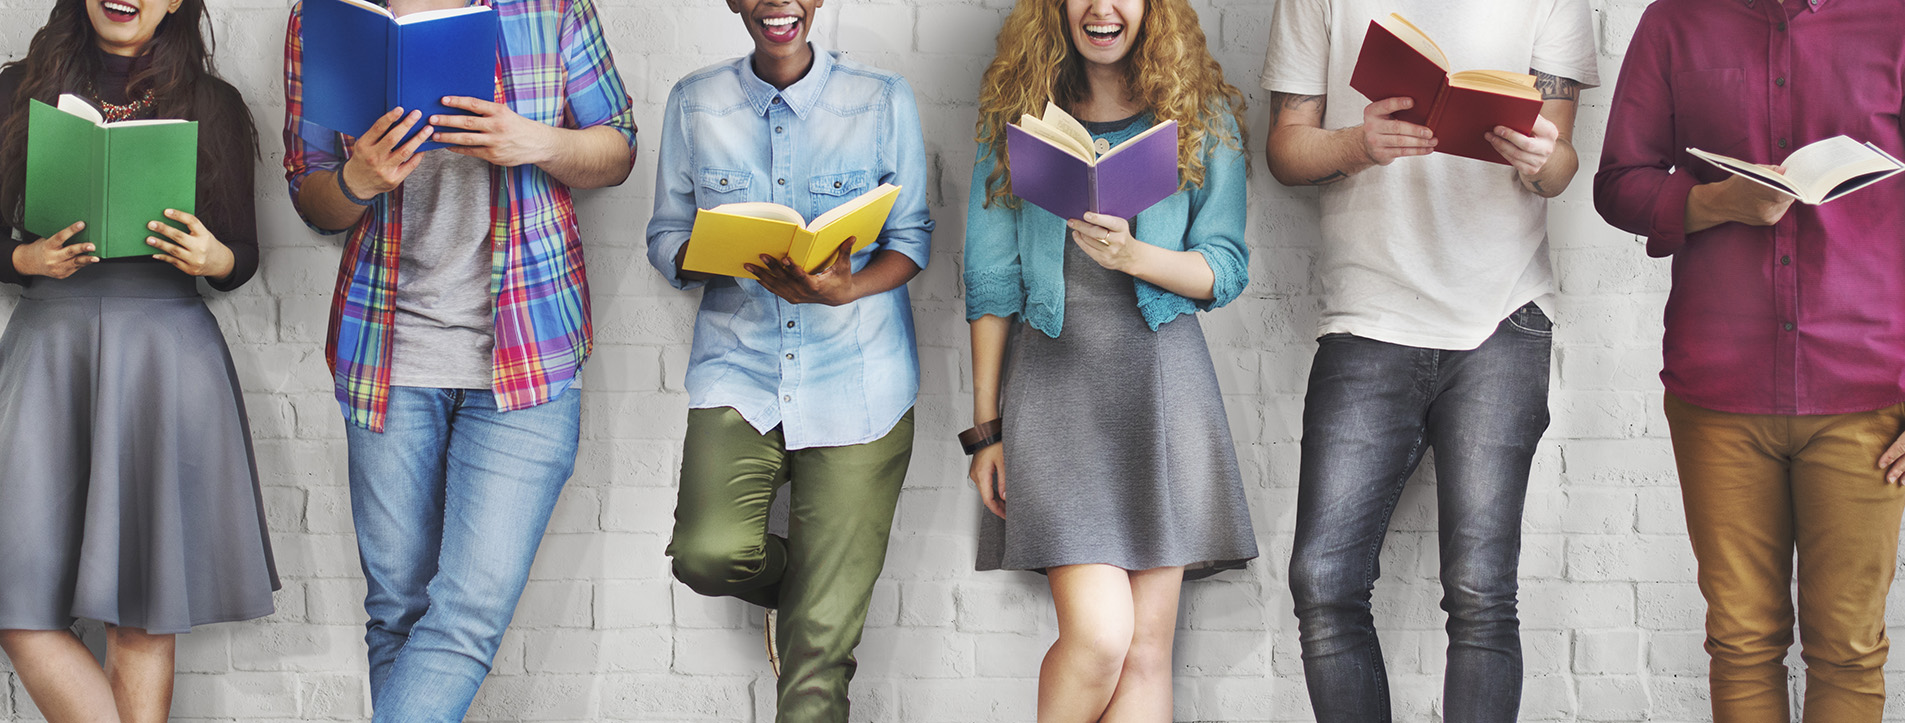 Students from neck down wearing different clothing styles and reading books